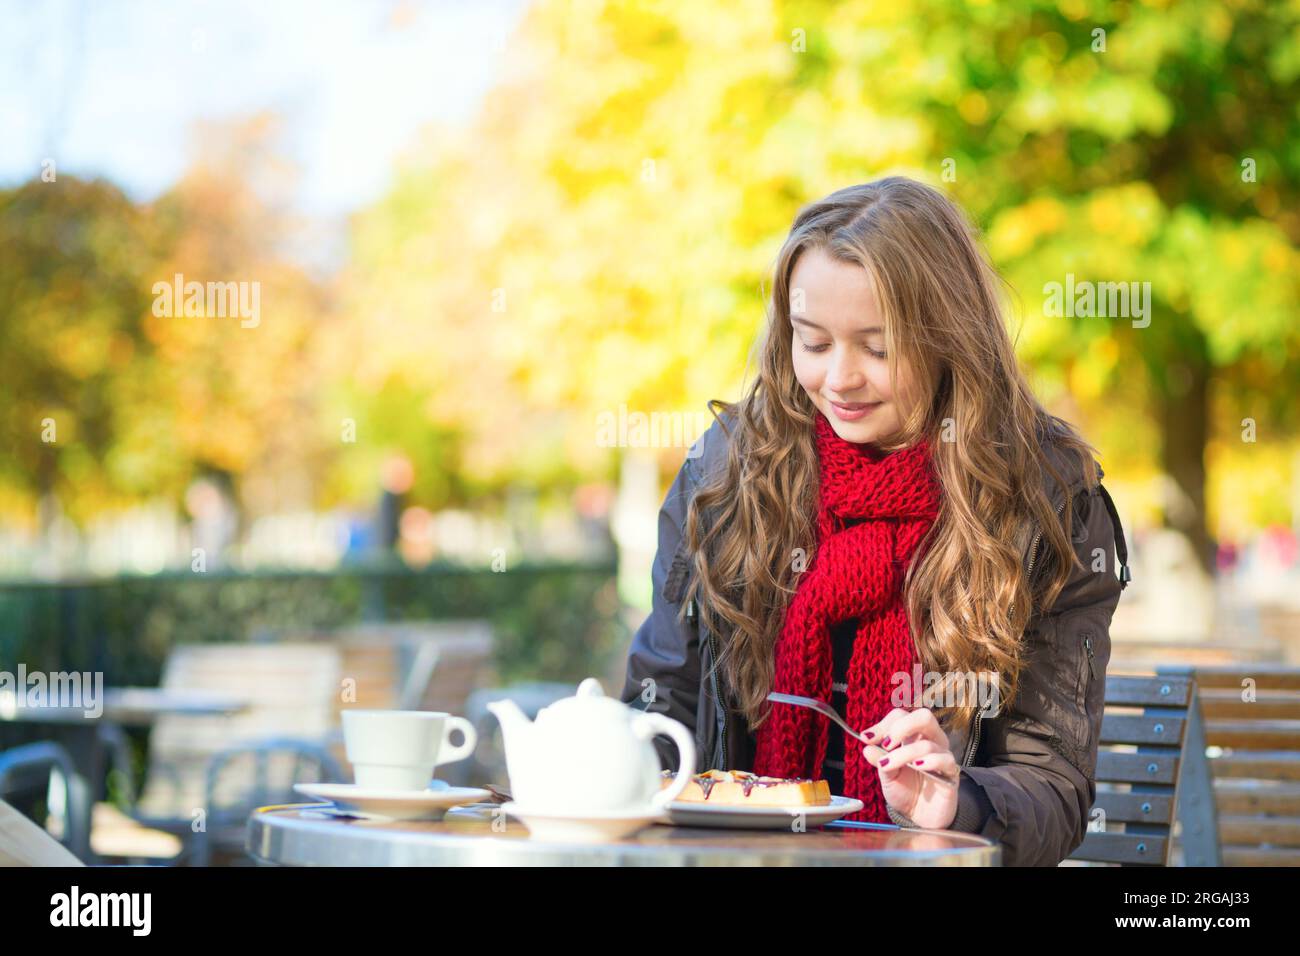 Girl eating waffles in a Parisian outdoor cafe Stock Photo